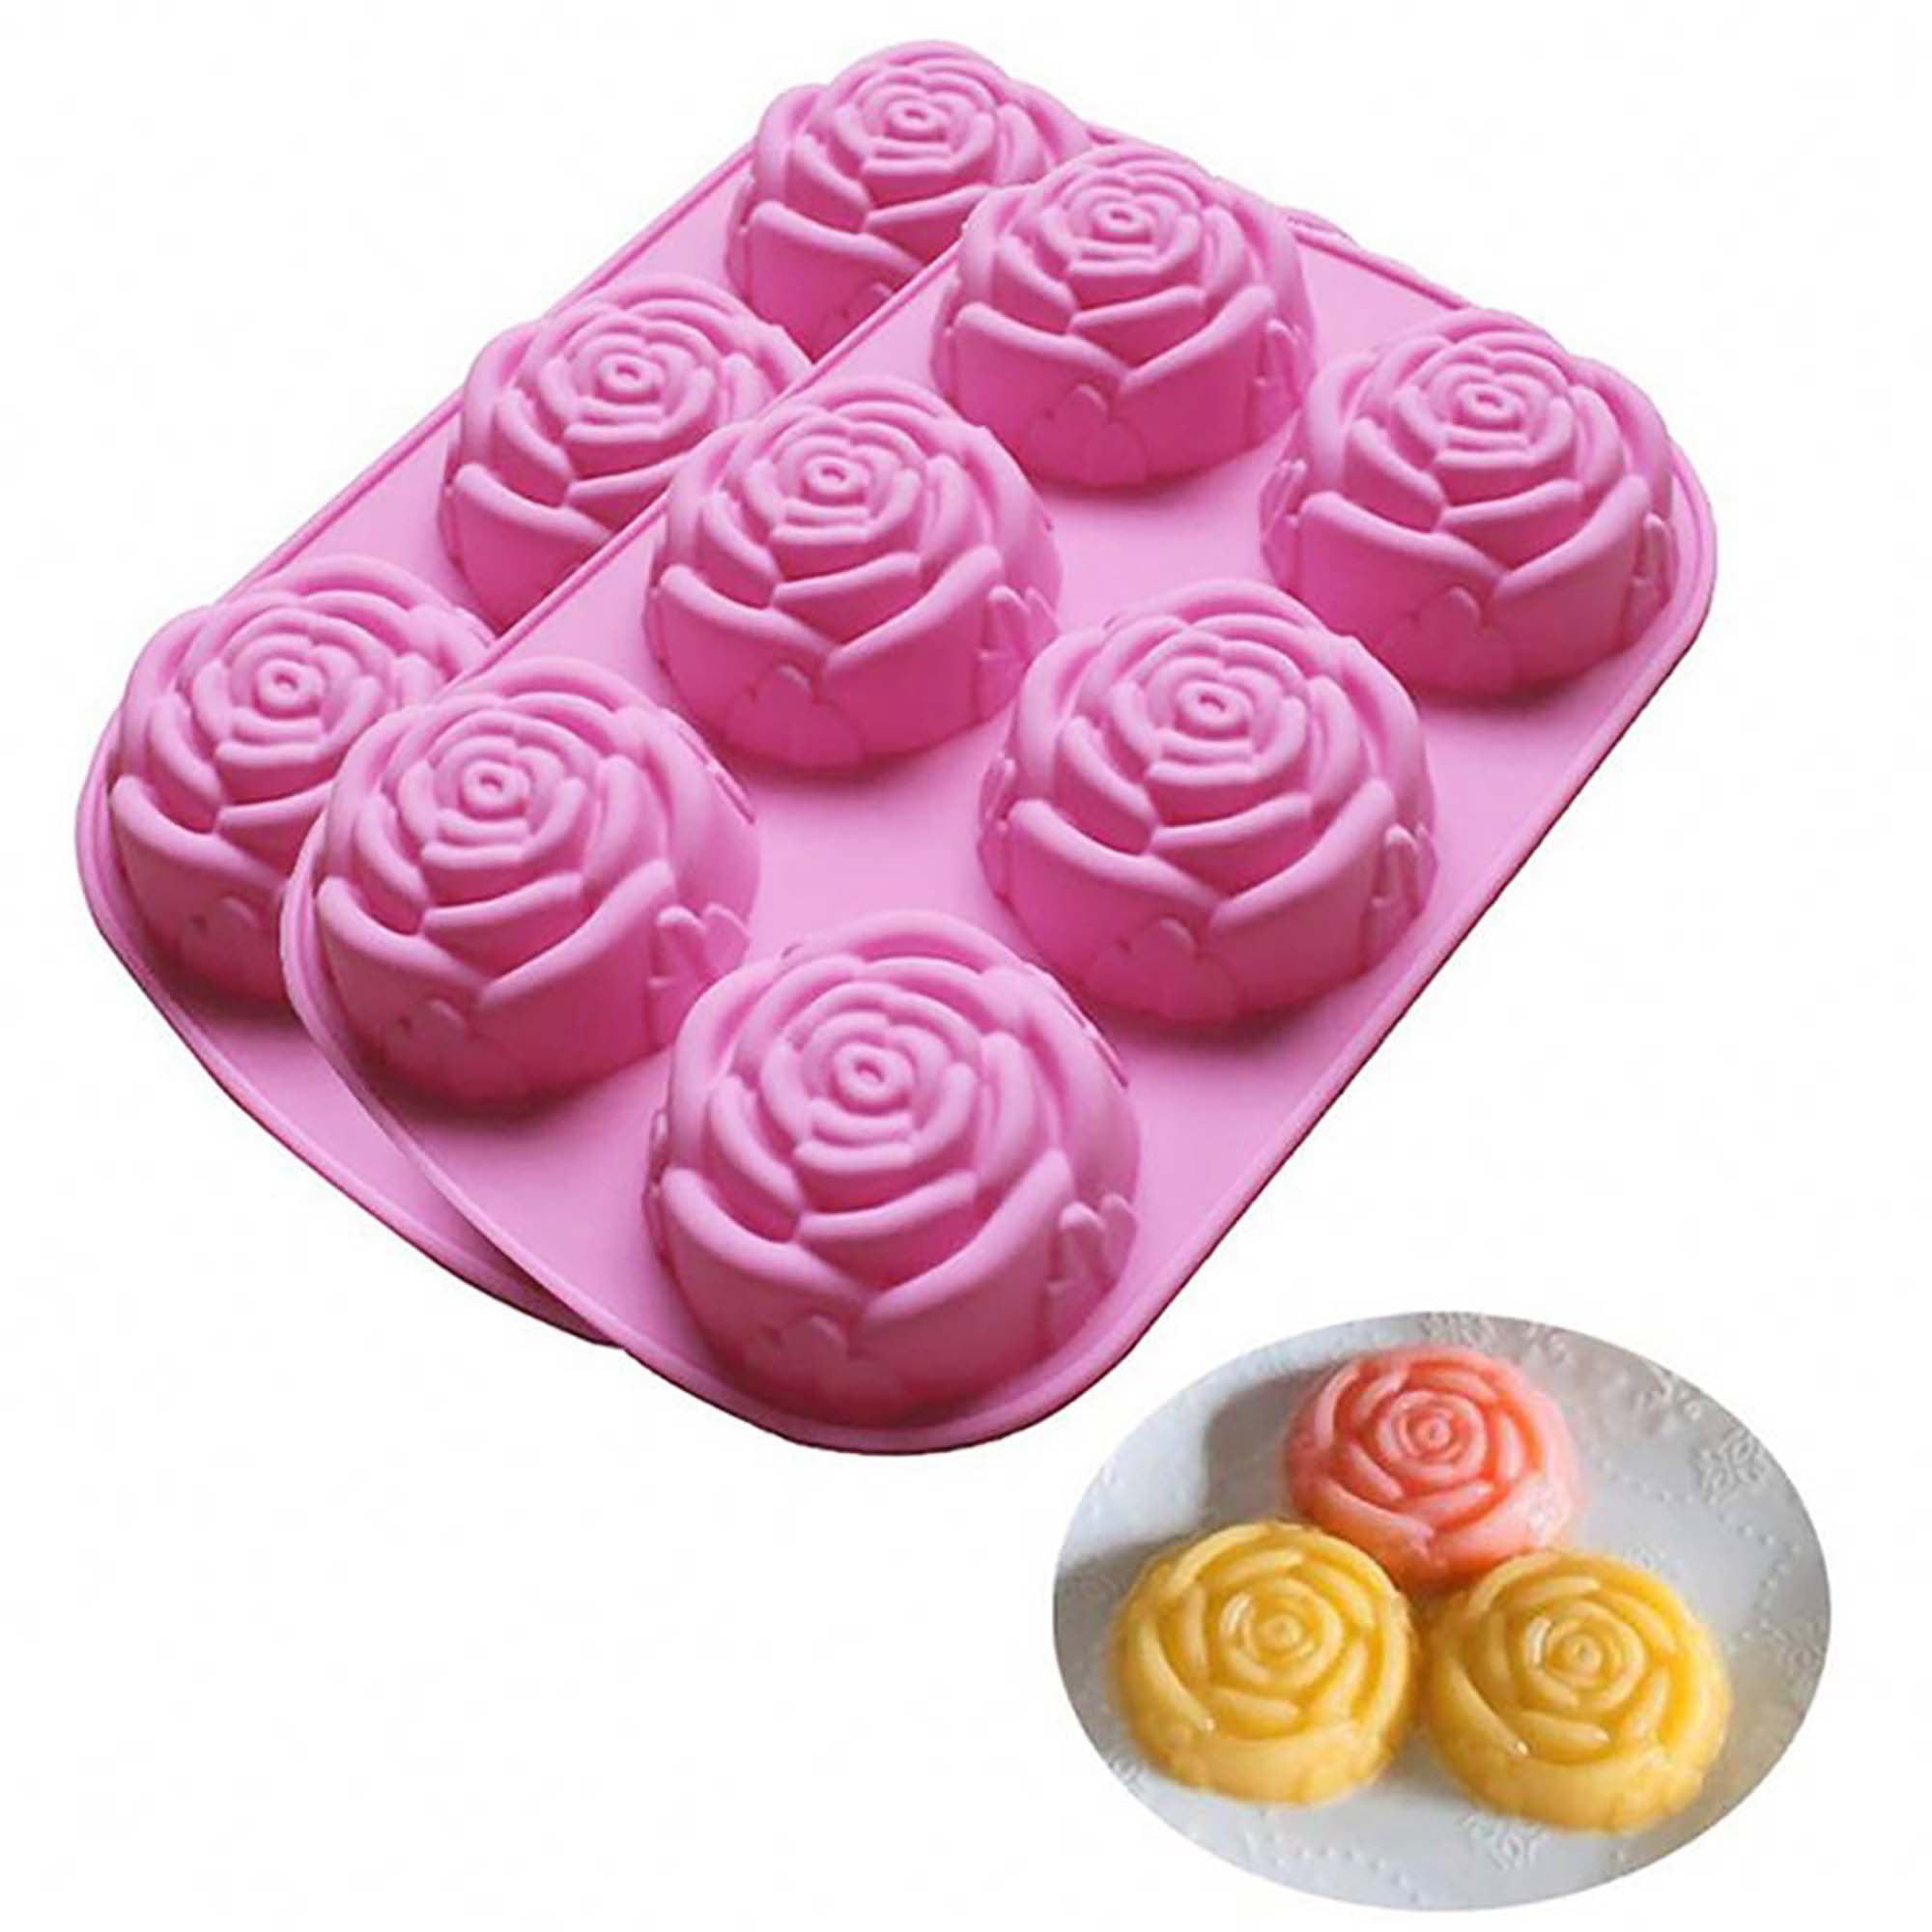 Details about   3D 6 ROSE FLOWER Silicone Fondant Cake Mold Chocolate Bombs Candy Baking Mould 